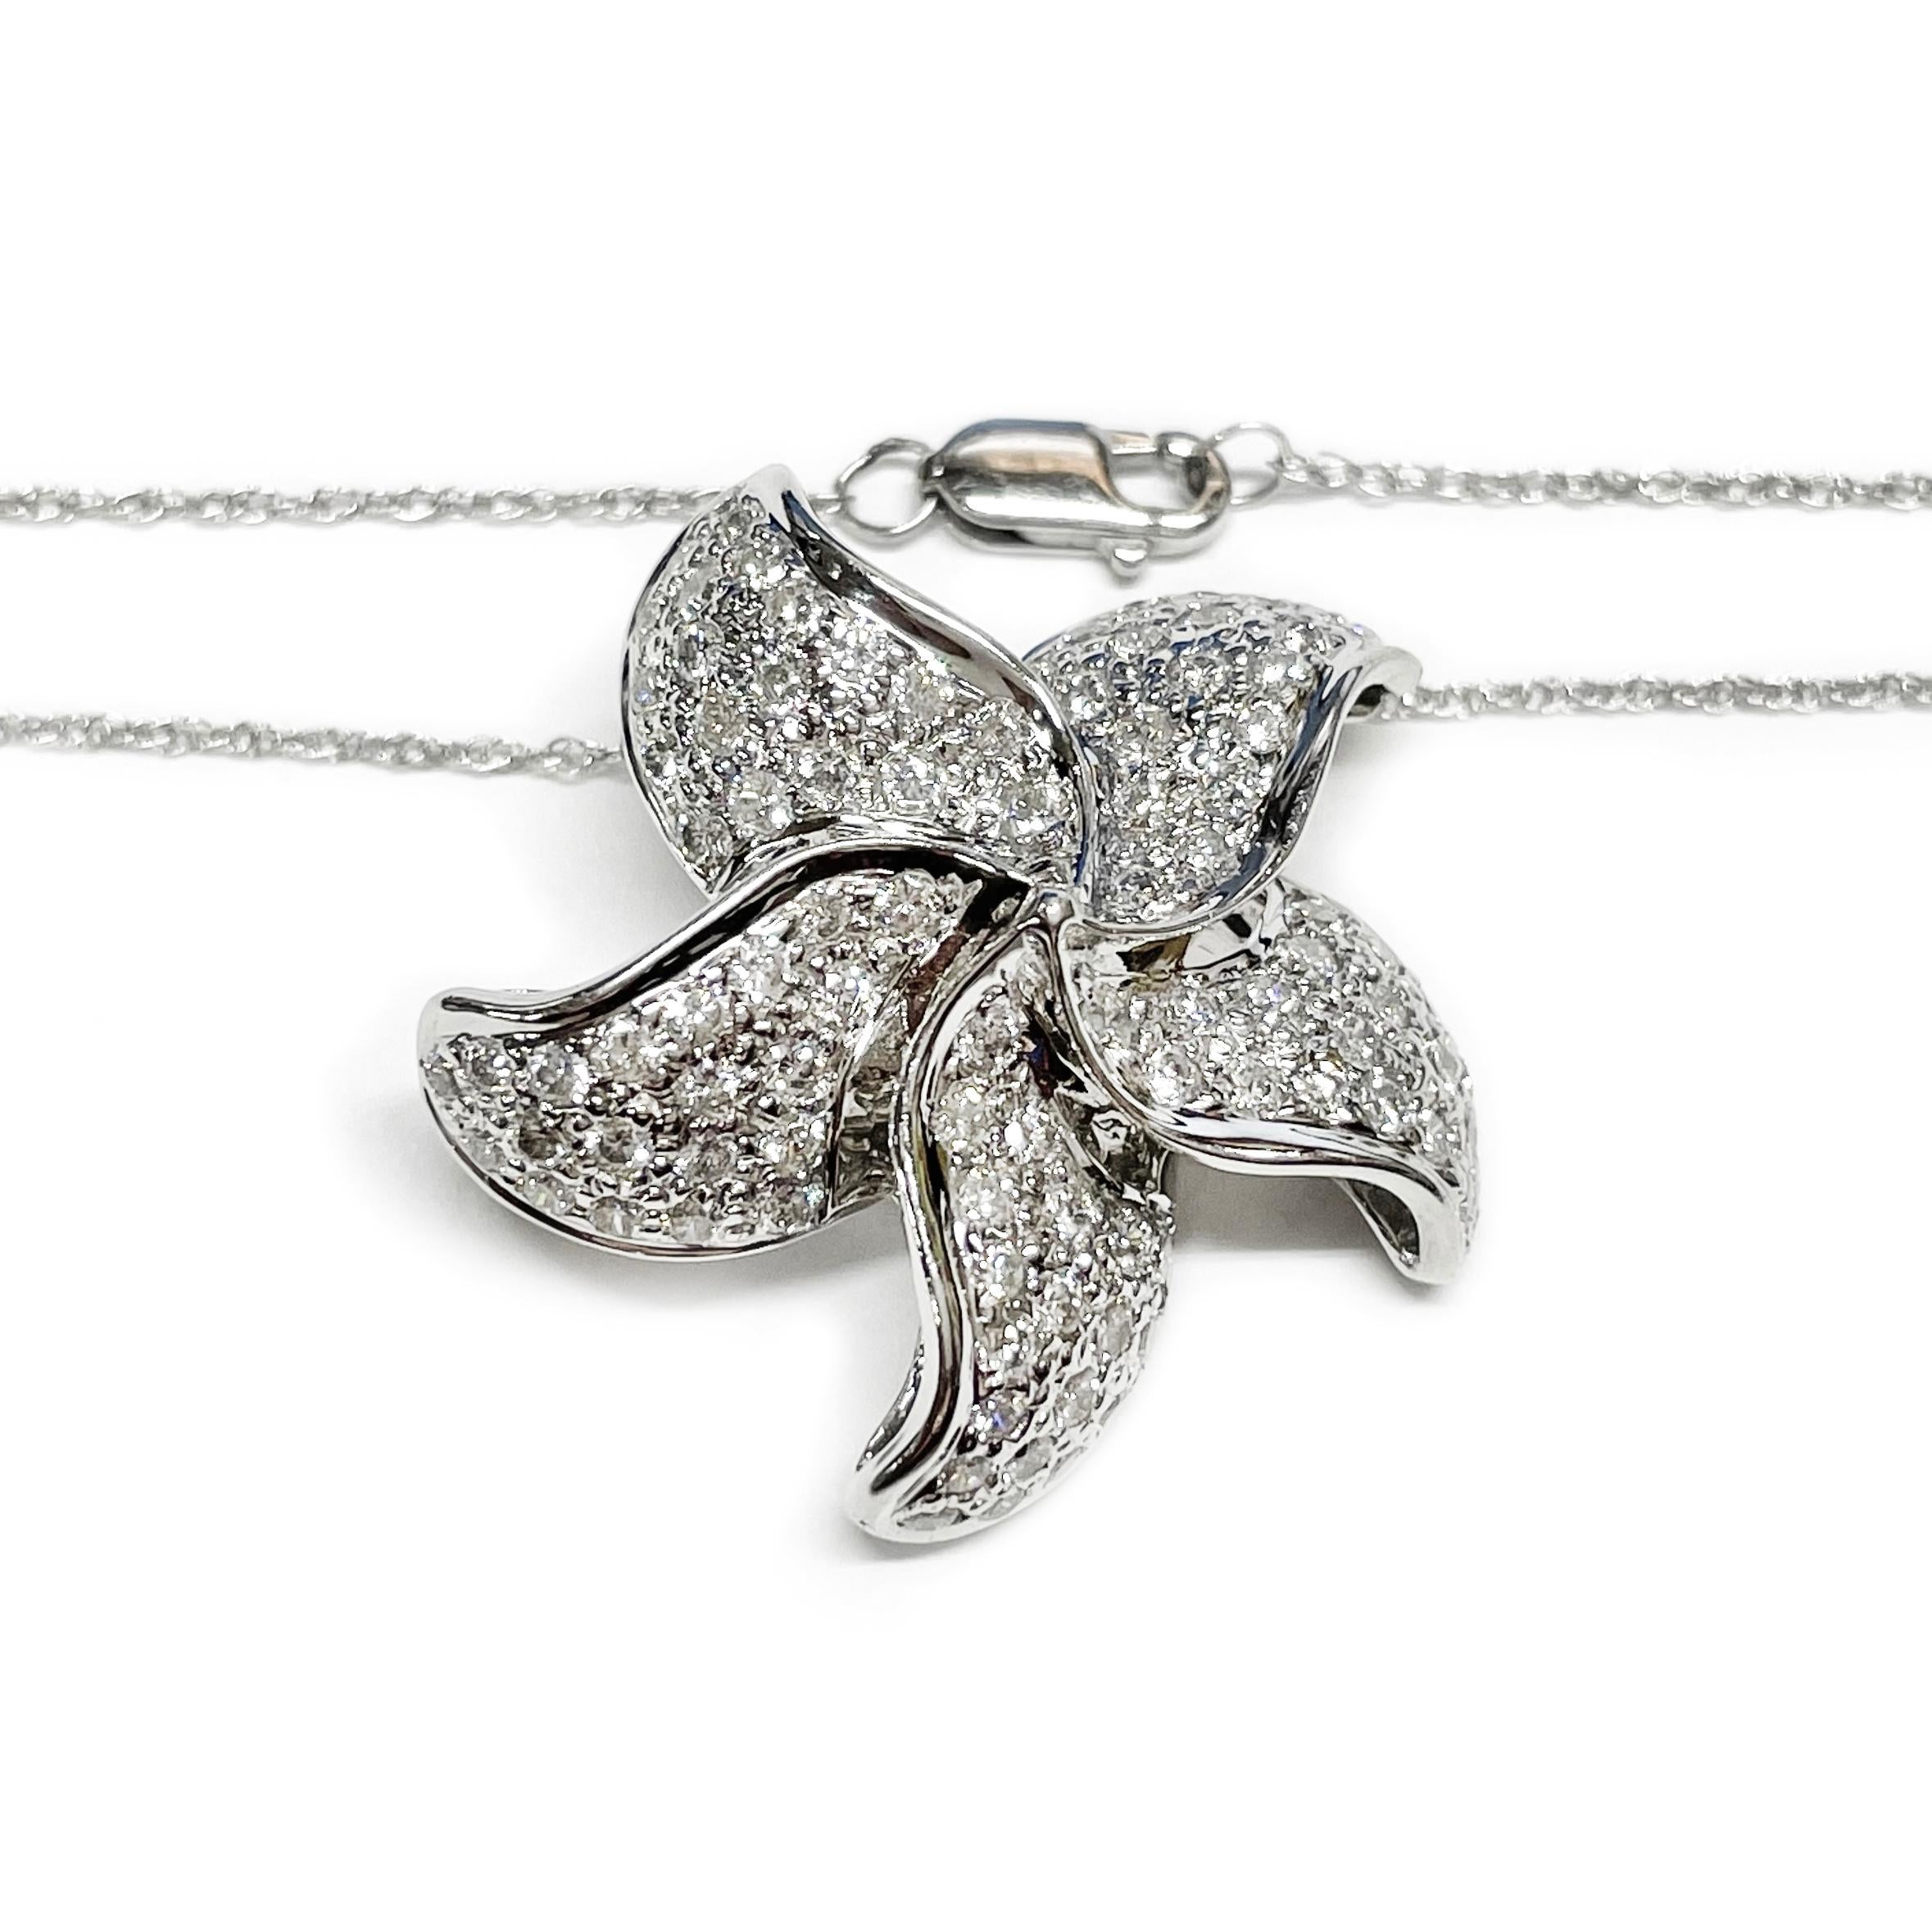 18 Karat White Gold Diamond Flower Pendant/Brooch Necklace. The pendant features a five-pedal flower with eighty 1.7mm round pave-set brilliant-cut diamonds. The pendant can also be worn as a brooch/pin. The diamonds are VS1 (G.I.A.) in clarity and